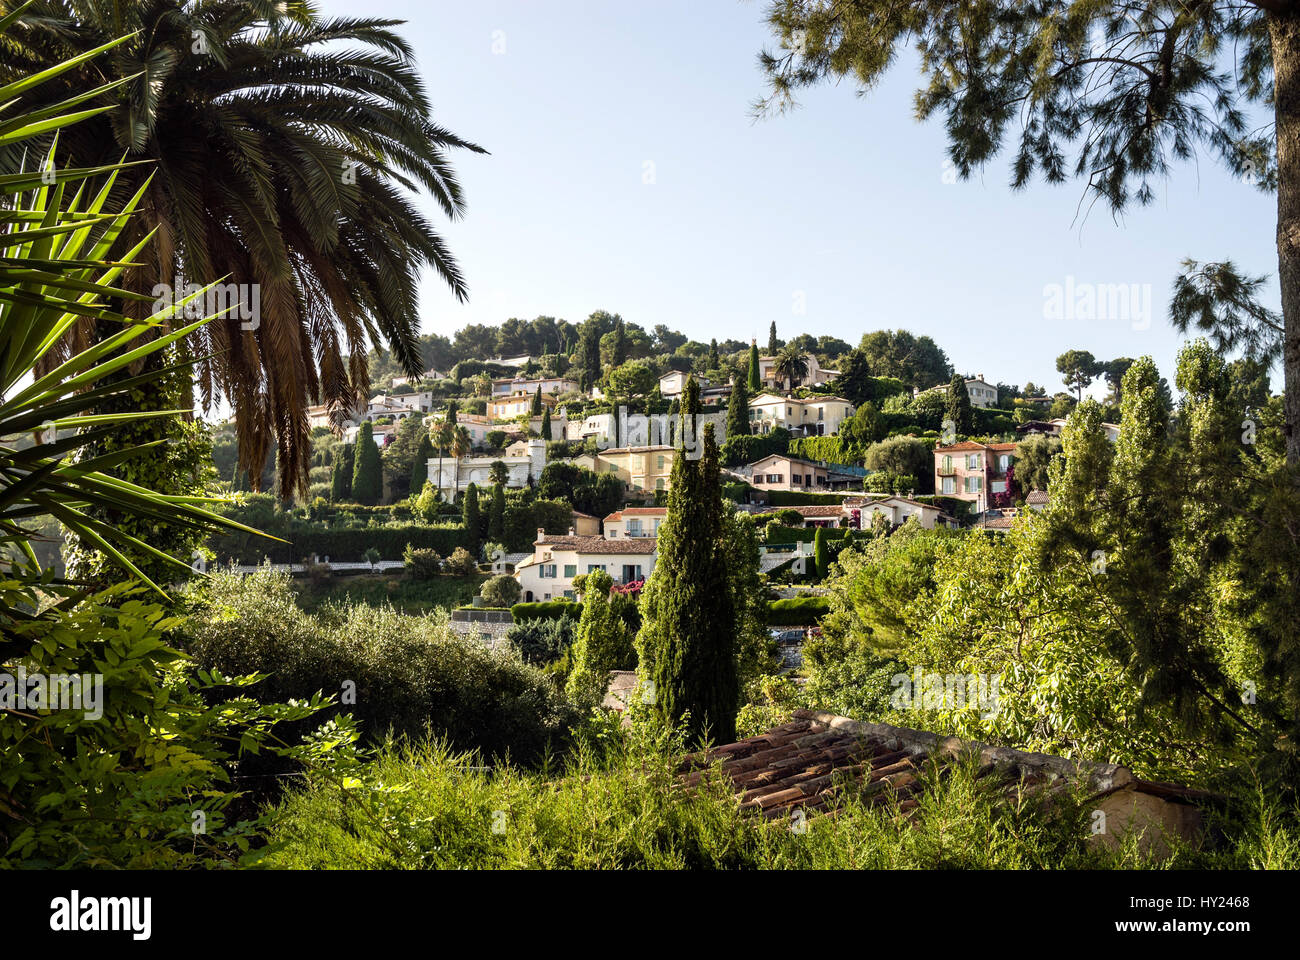 View from the old town of the Village into the surrounding back country landscape of the Cote d'Azur. Stock Photo